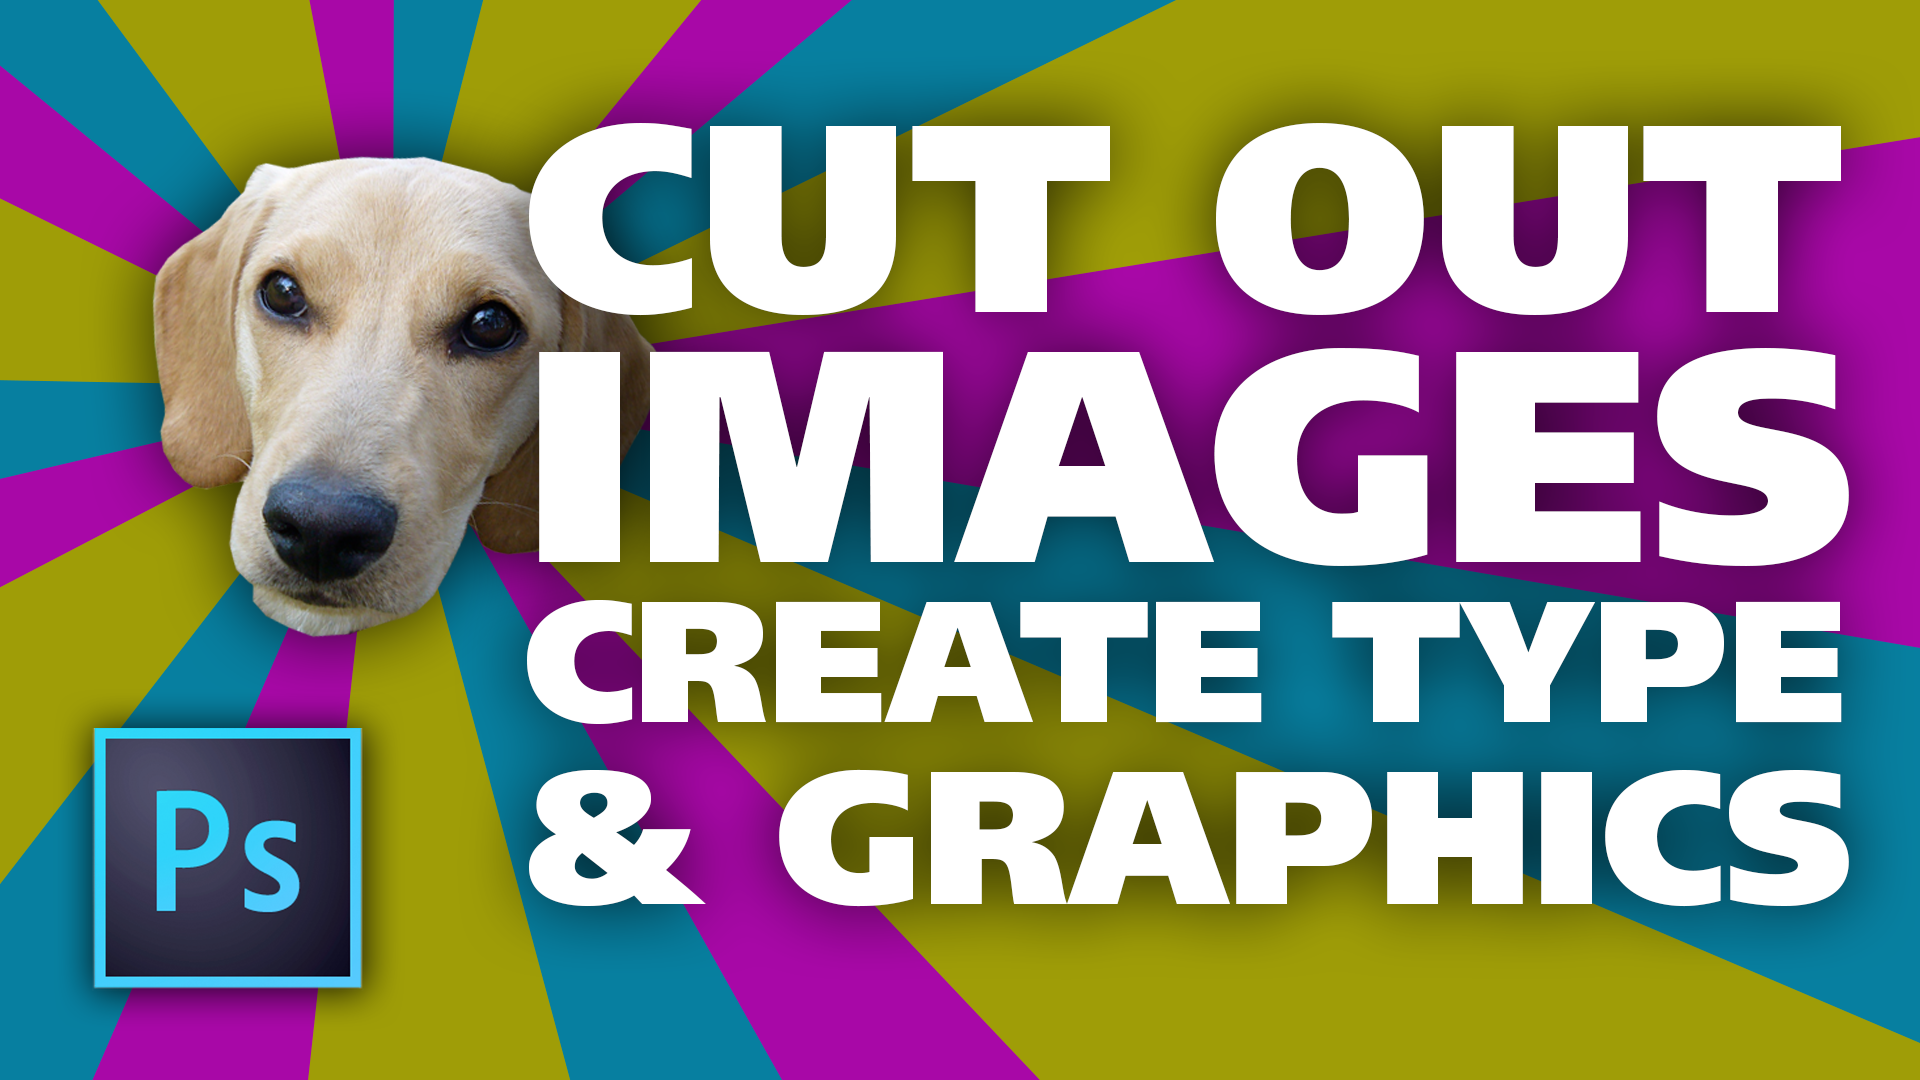 Photoshop Cut Out Images Create Graphics Type Meme